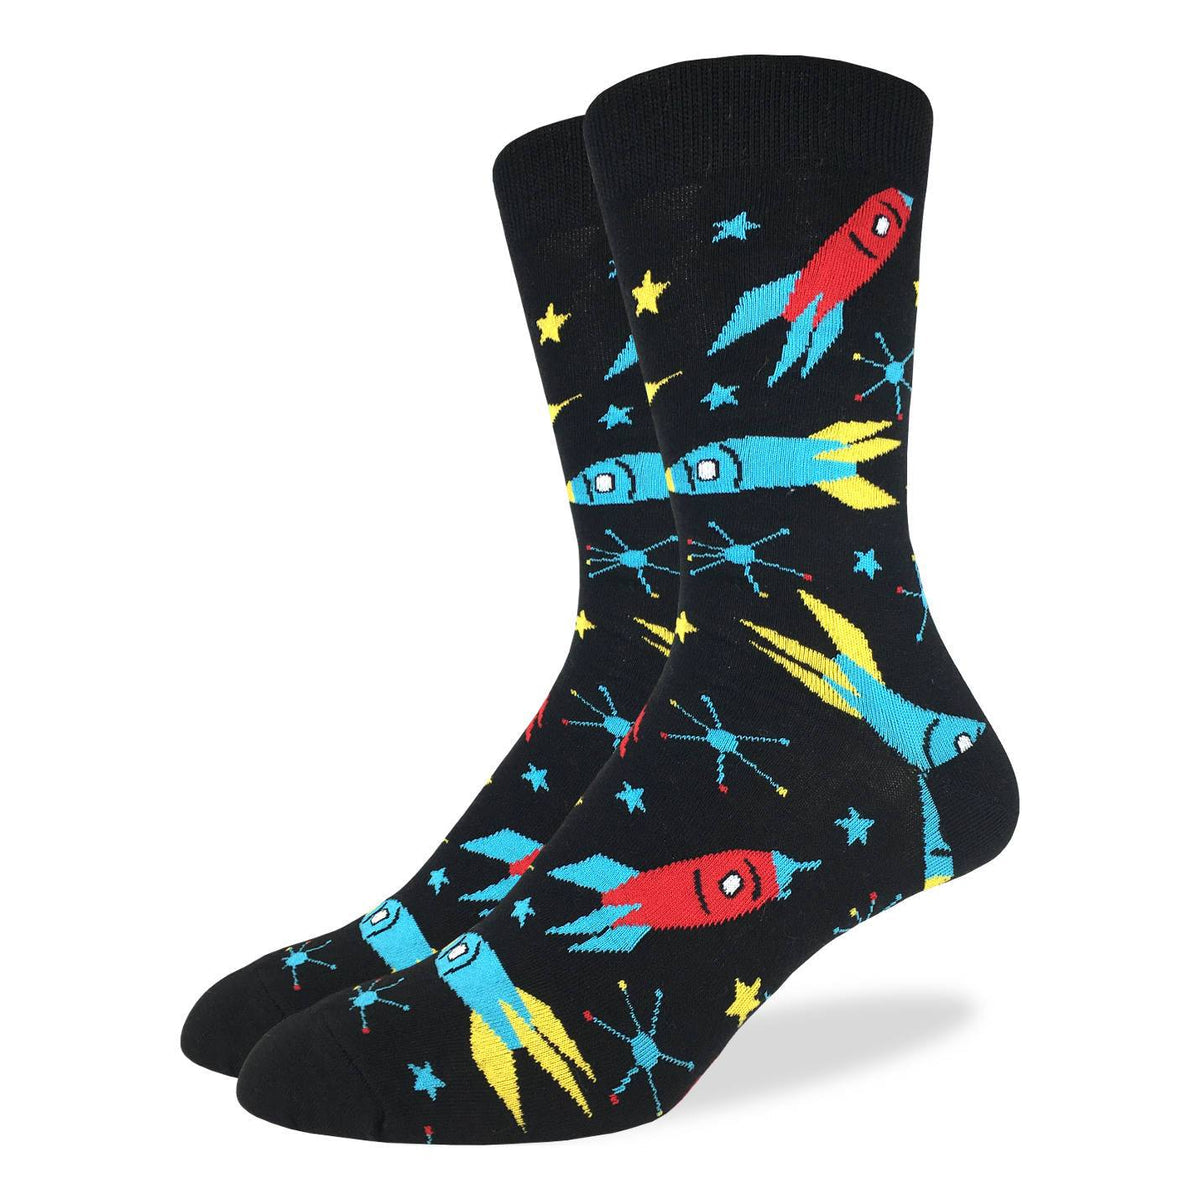 "Rockets" Cotton Crew Socks by Good Luck Sock - Large